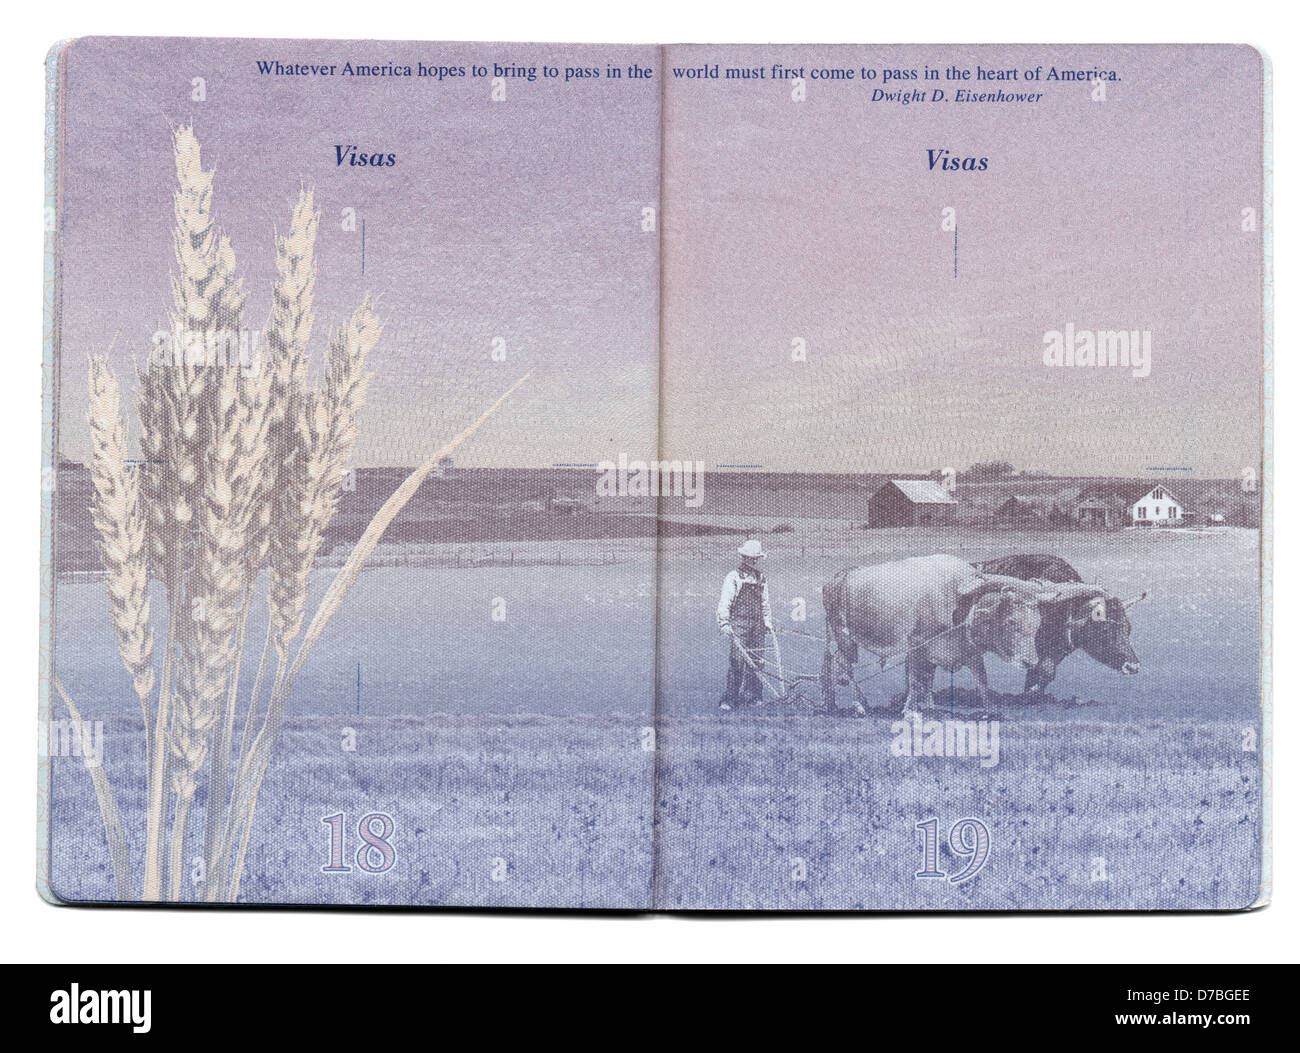 Pages 18 19 new USA passport still blank bacgkround image clearly visible. image shown here is an old-times farmer plowing his Stock Photo